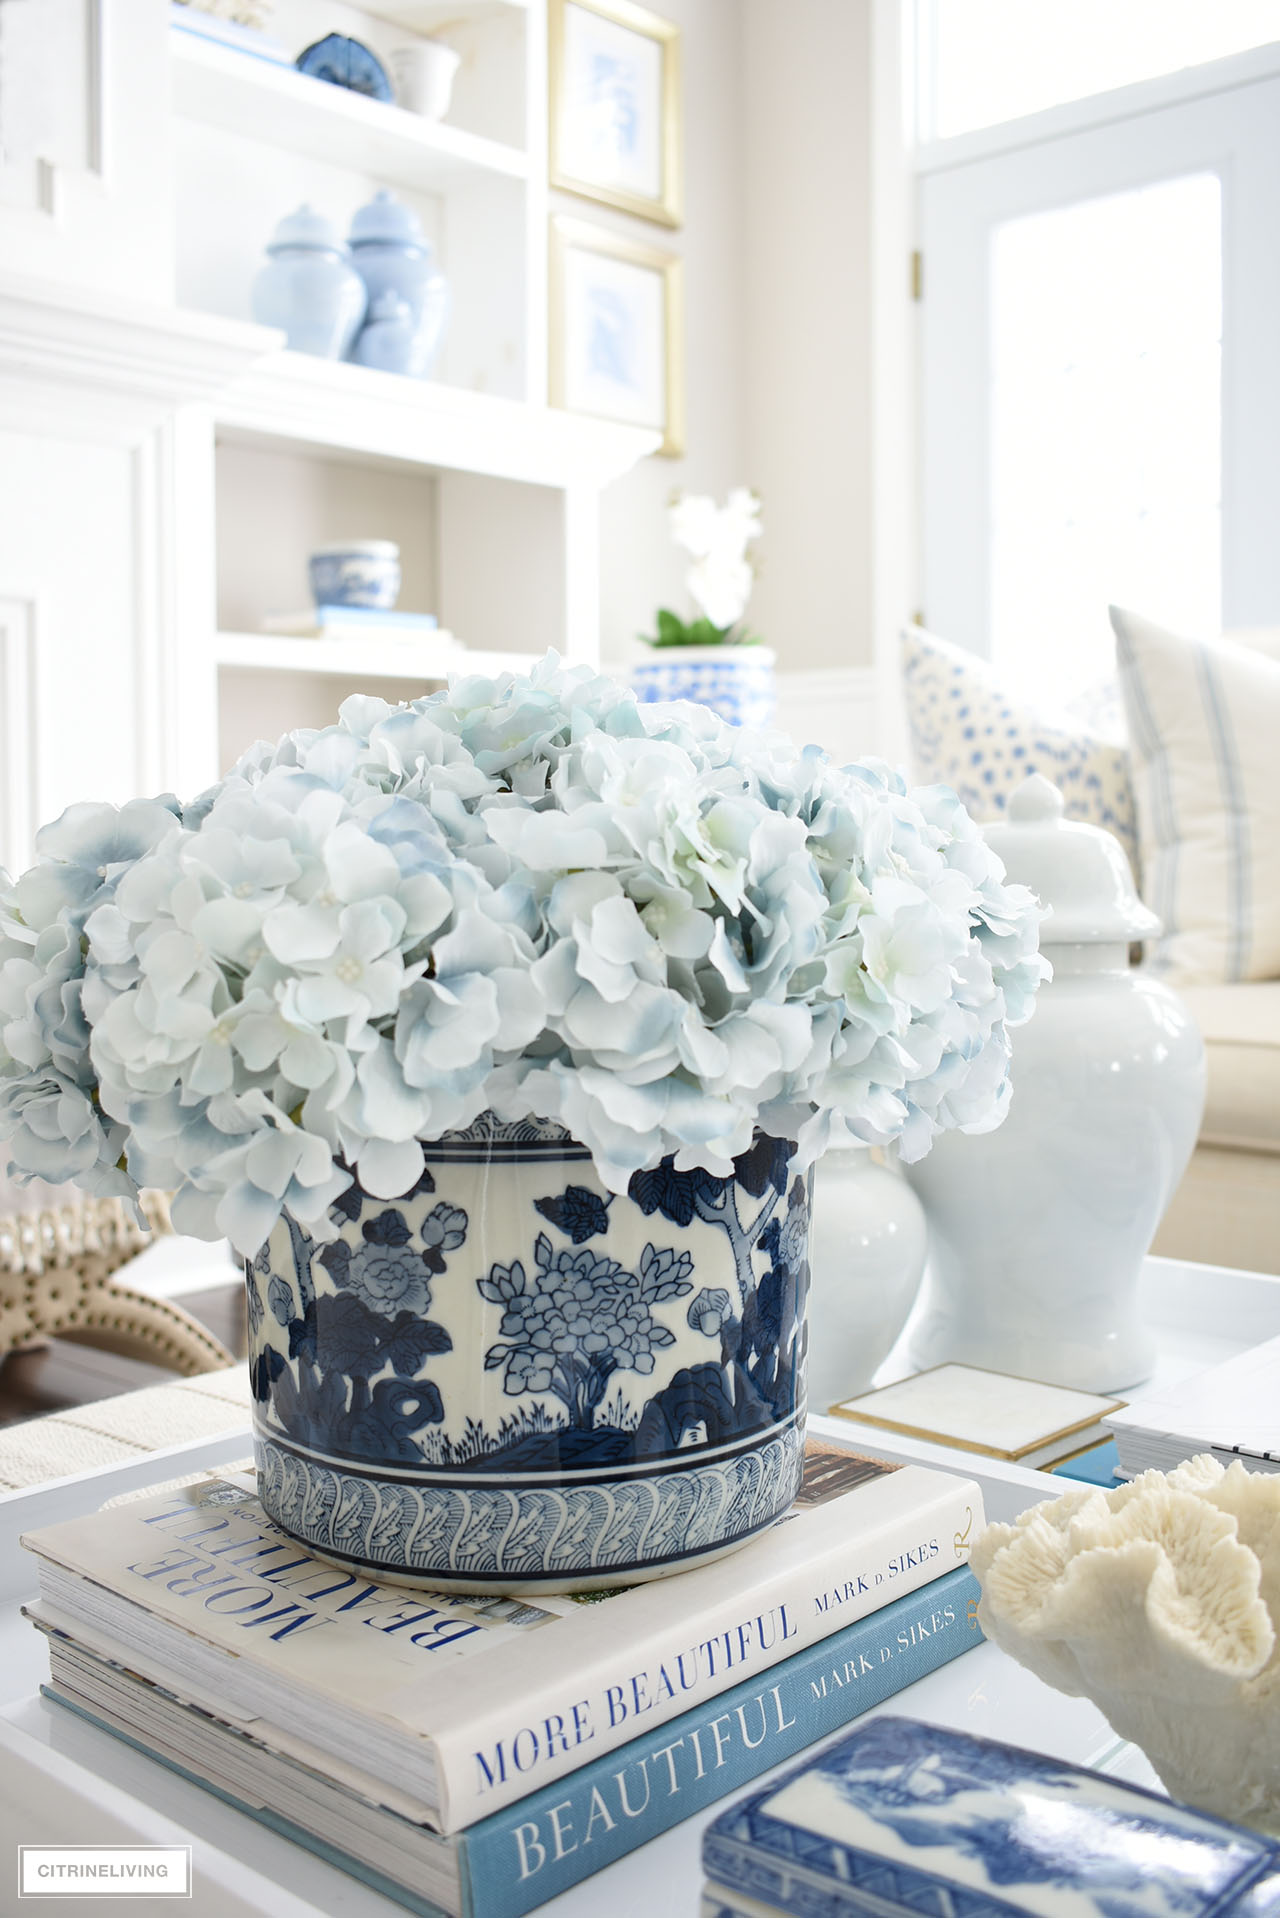 Spring coffee table decor with light blue hydrangeas arranged in a blue and white planter, styled atop decorating books on a white tray.